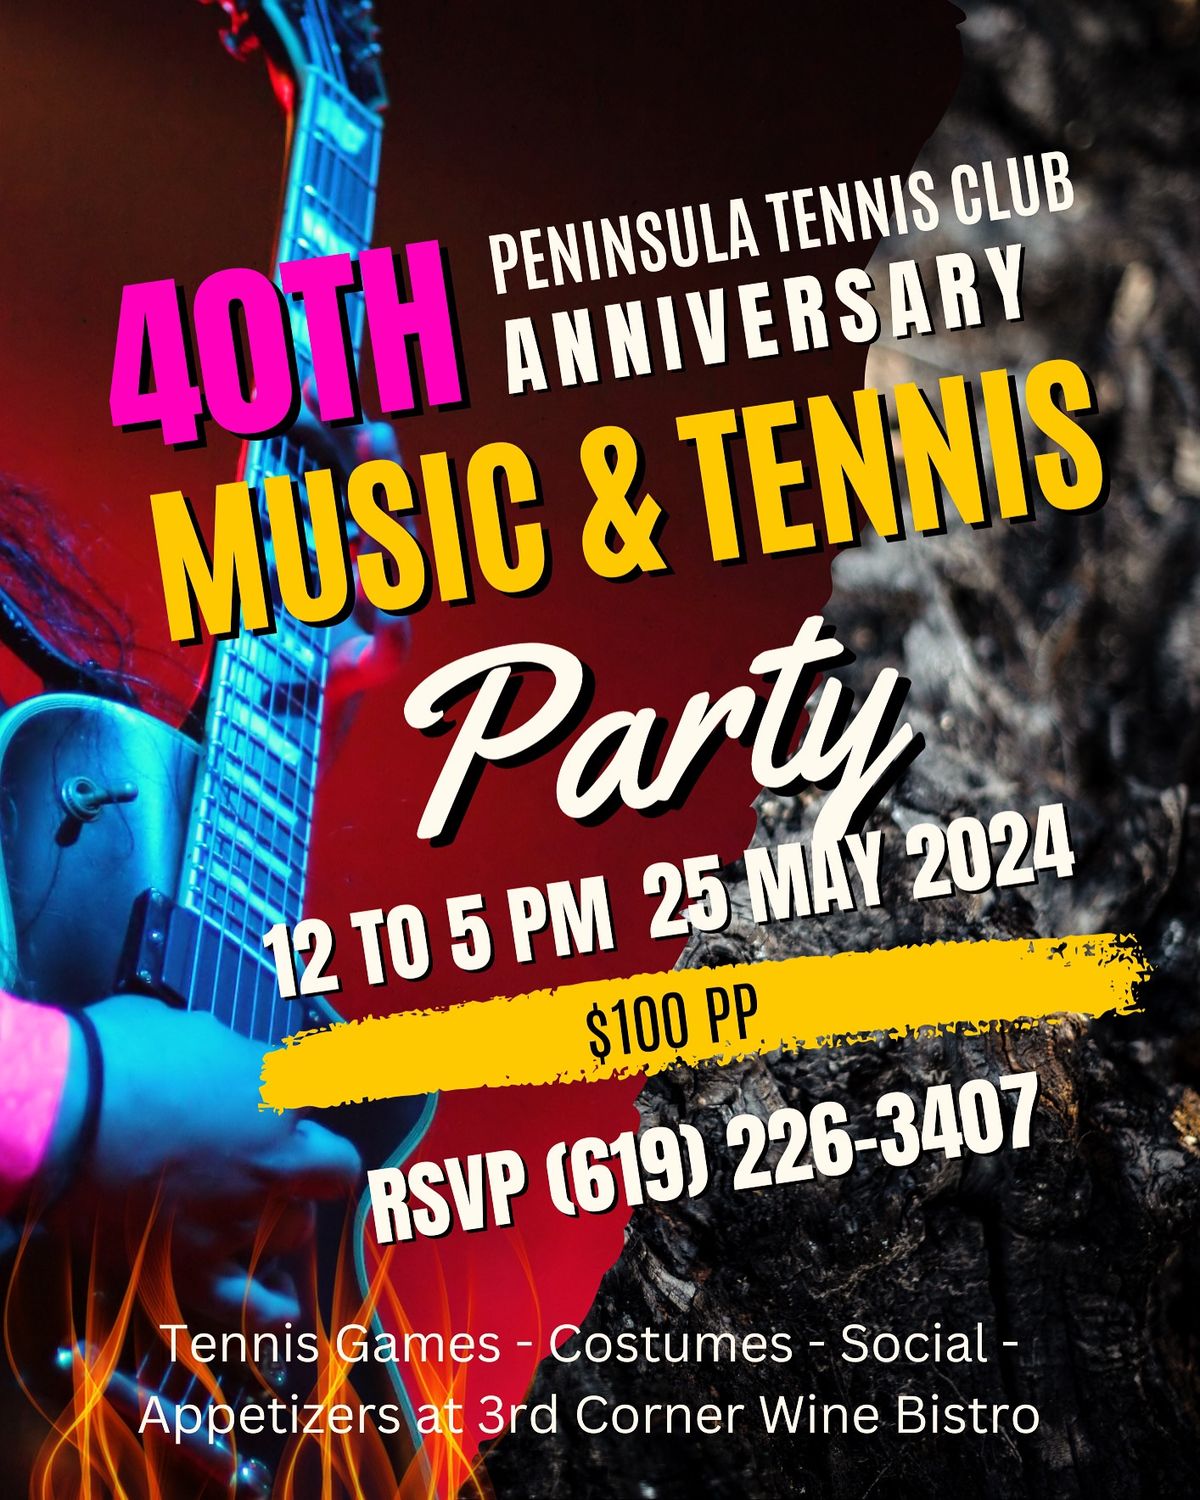 SAVE THE DATE - We're Turning 40 and We're Having a Party!